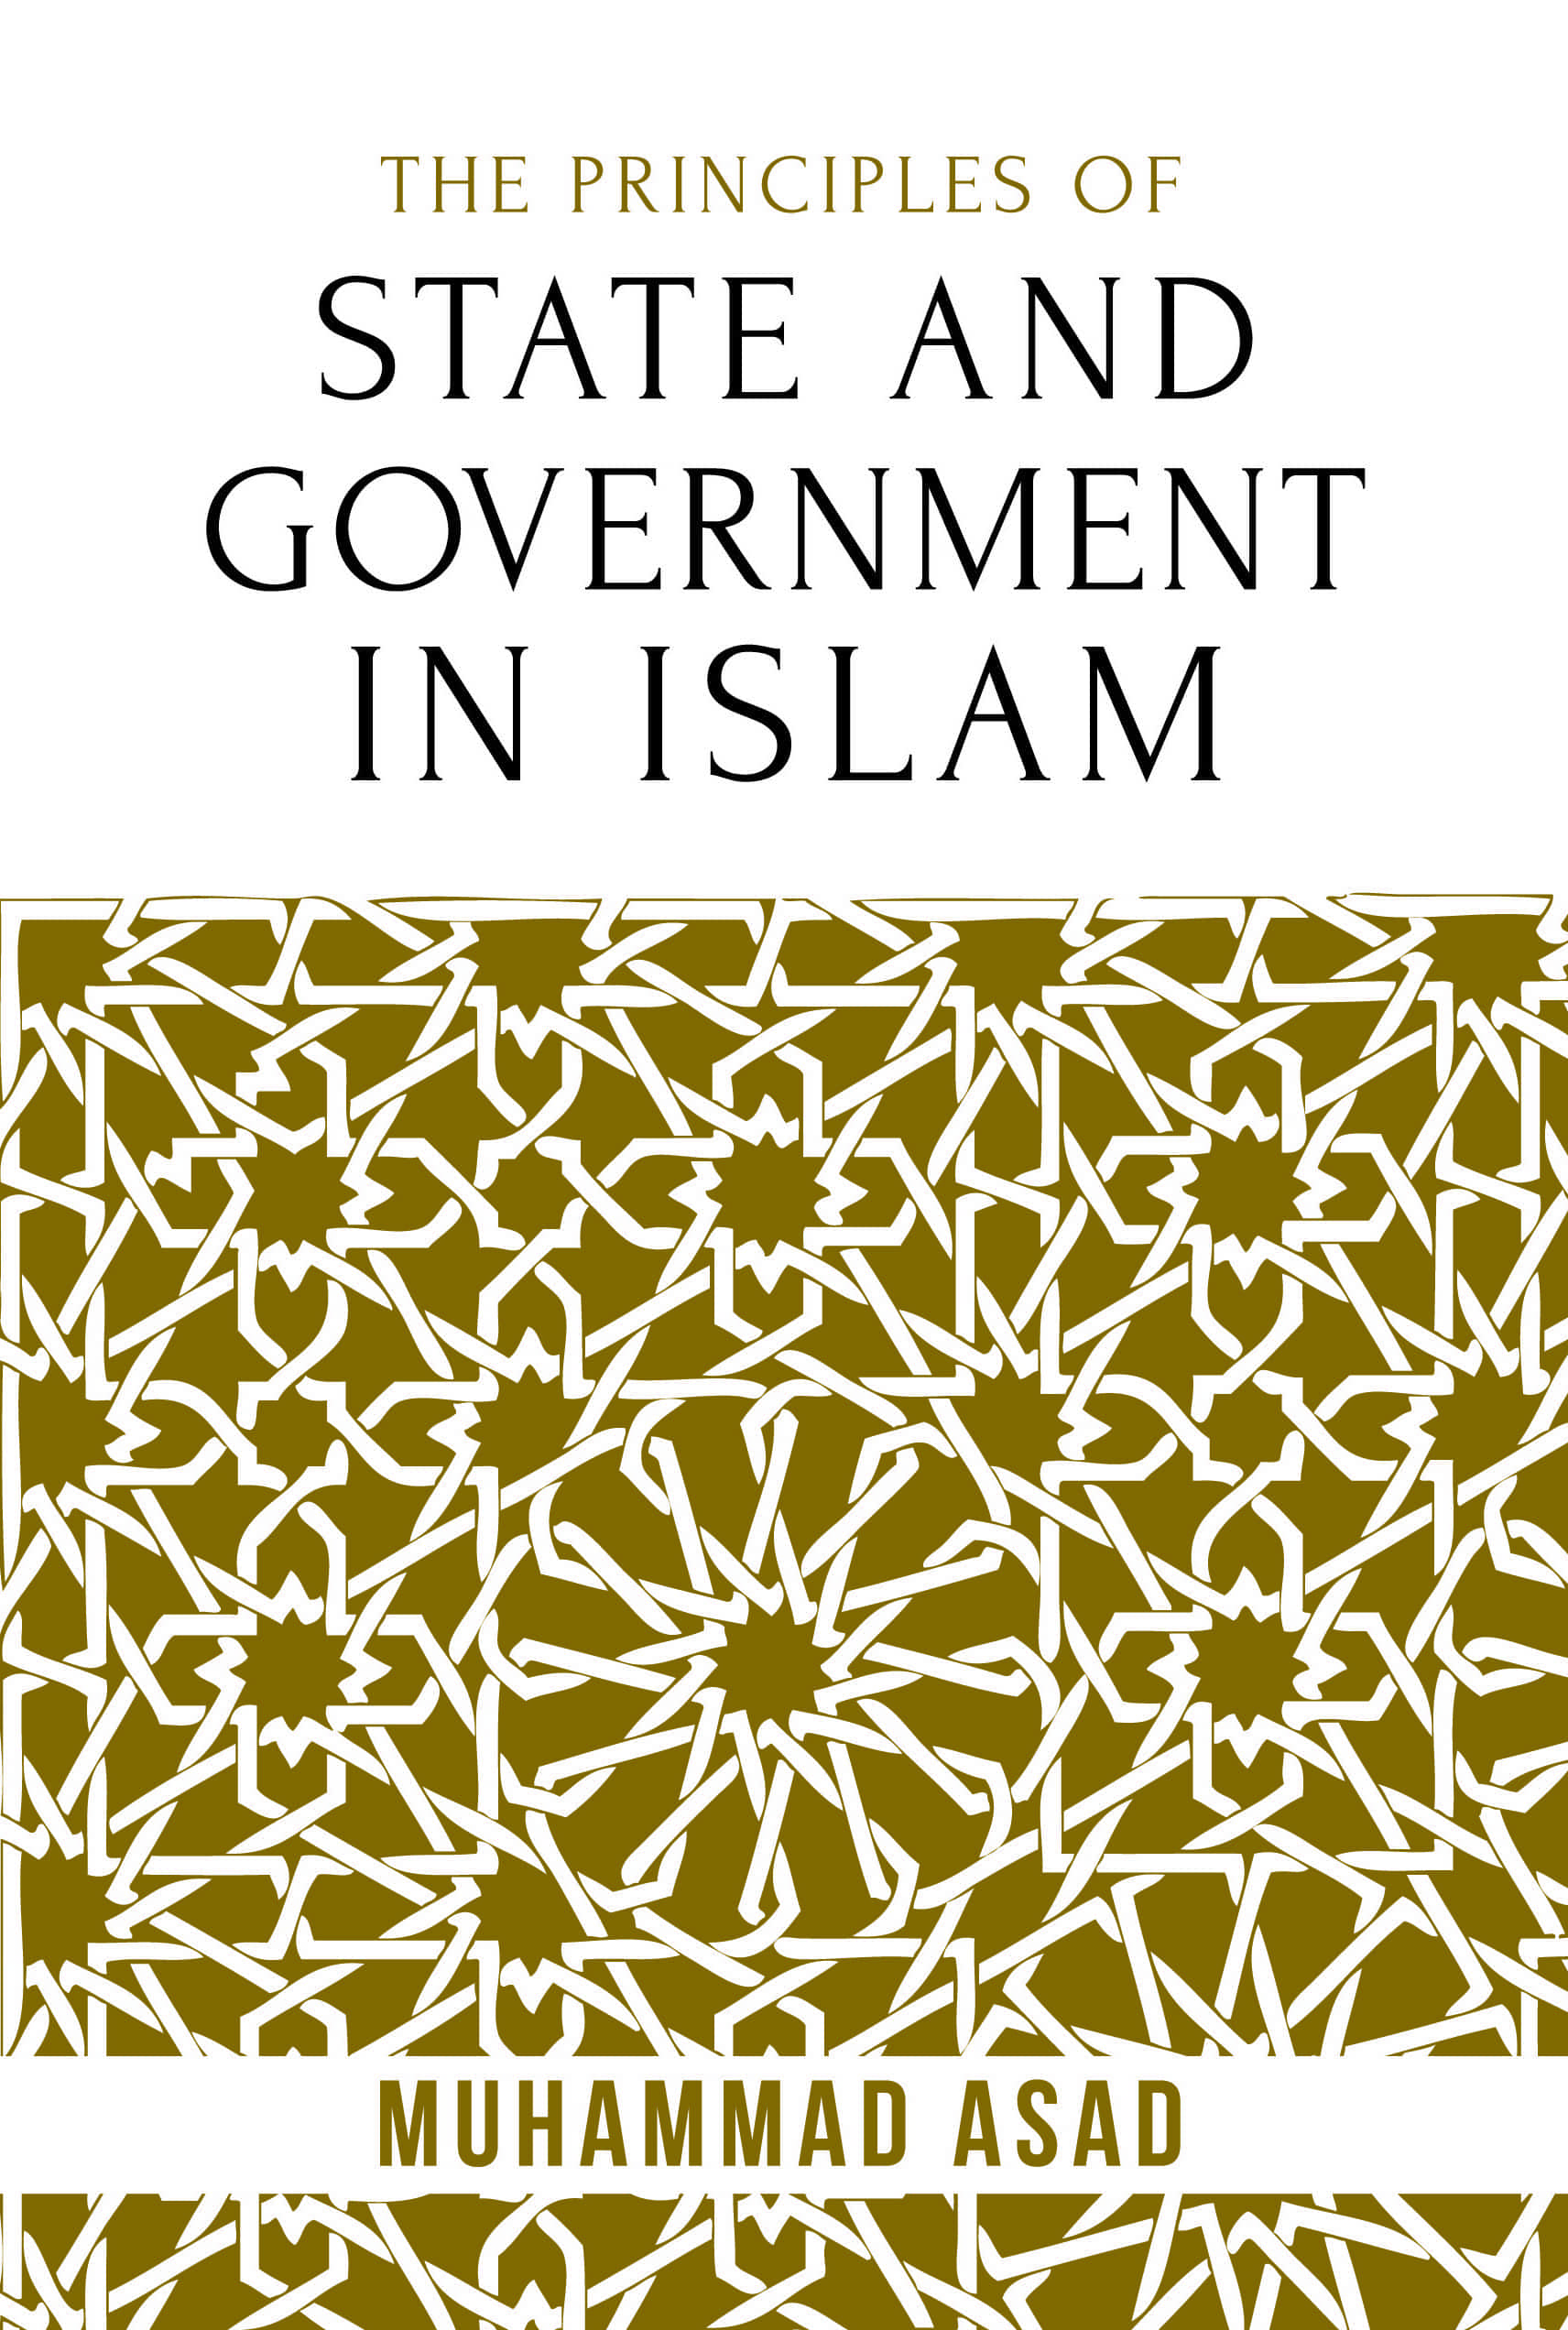 The Principles of State and Government in Islam